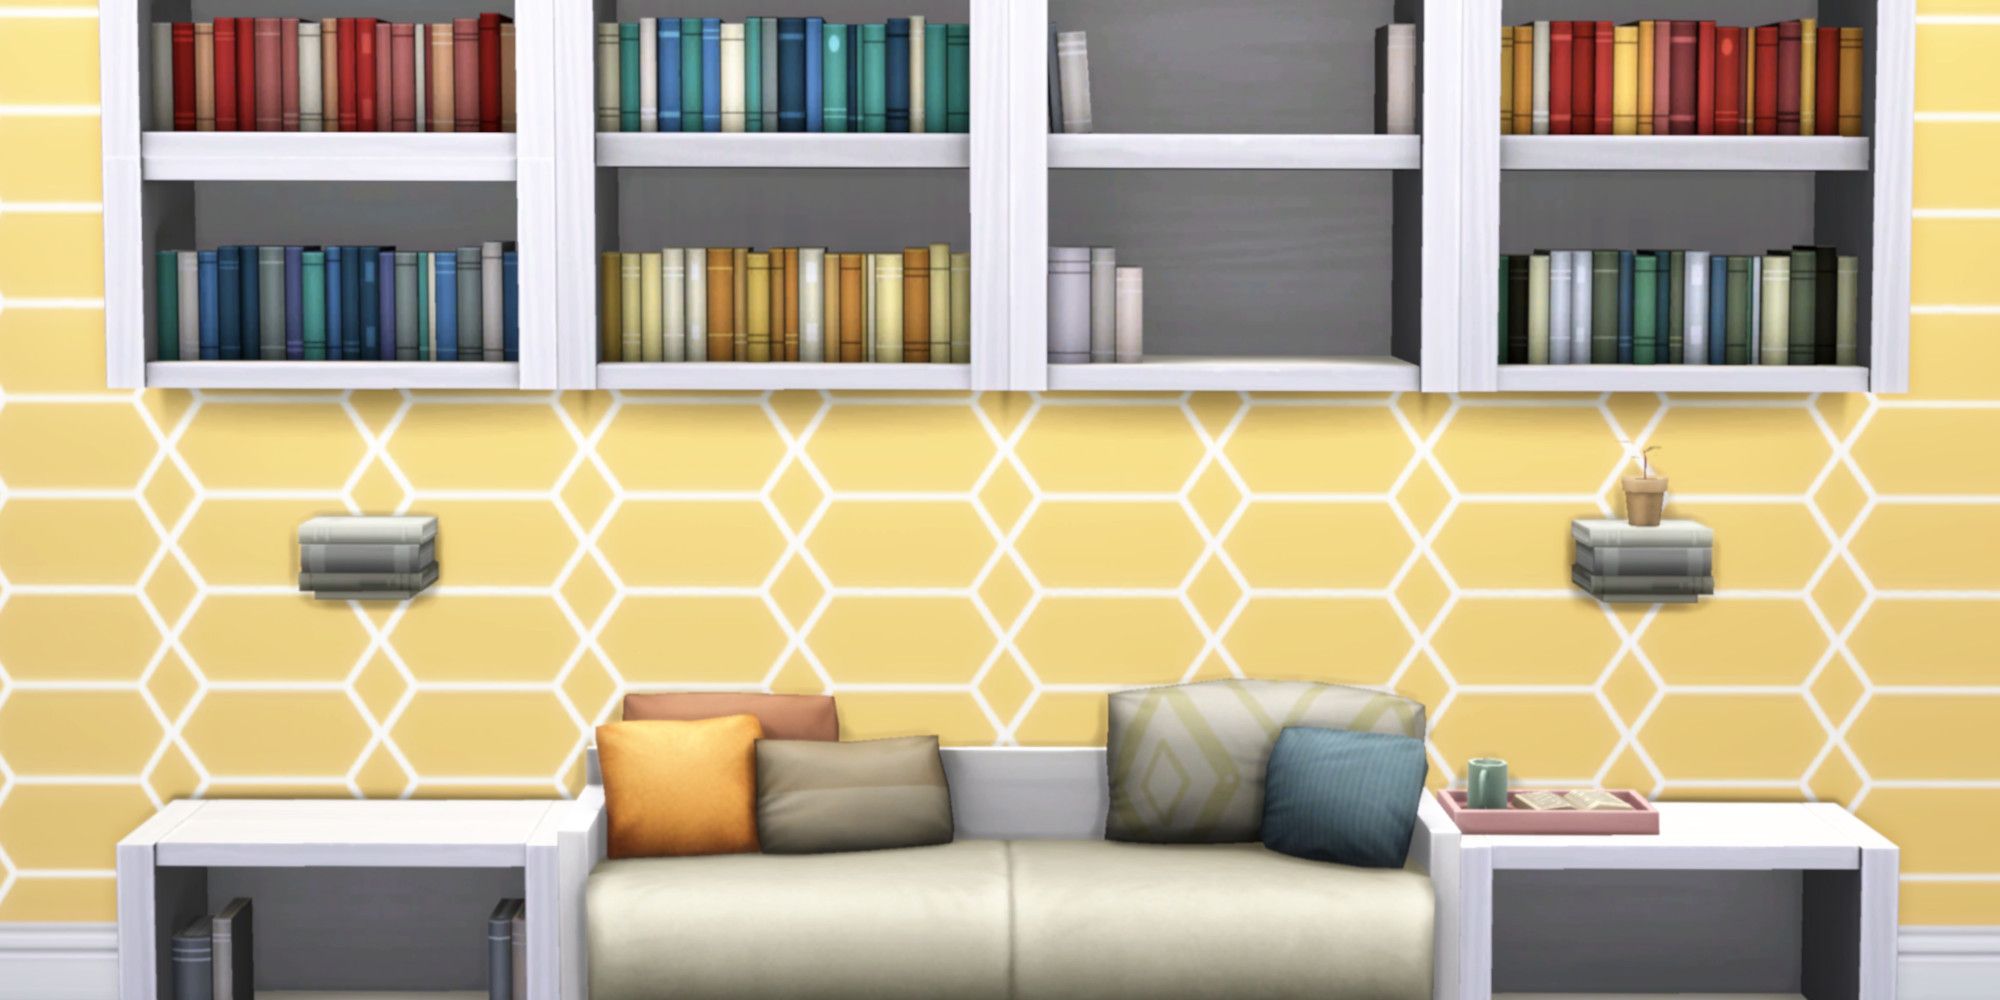 The Sims™ 4 Book Nook Kit on Steam